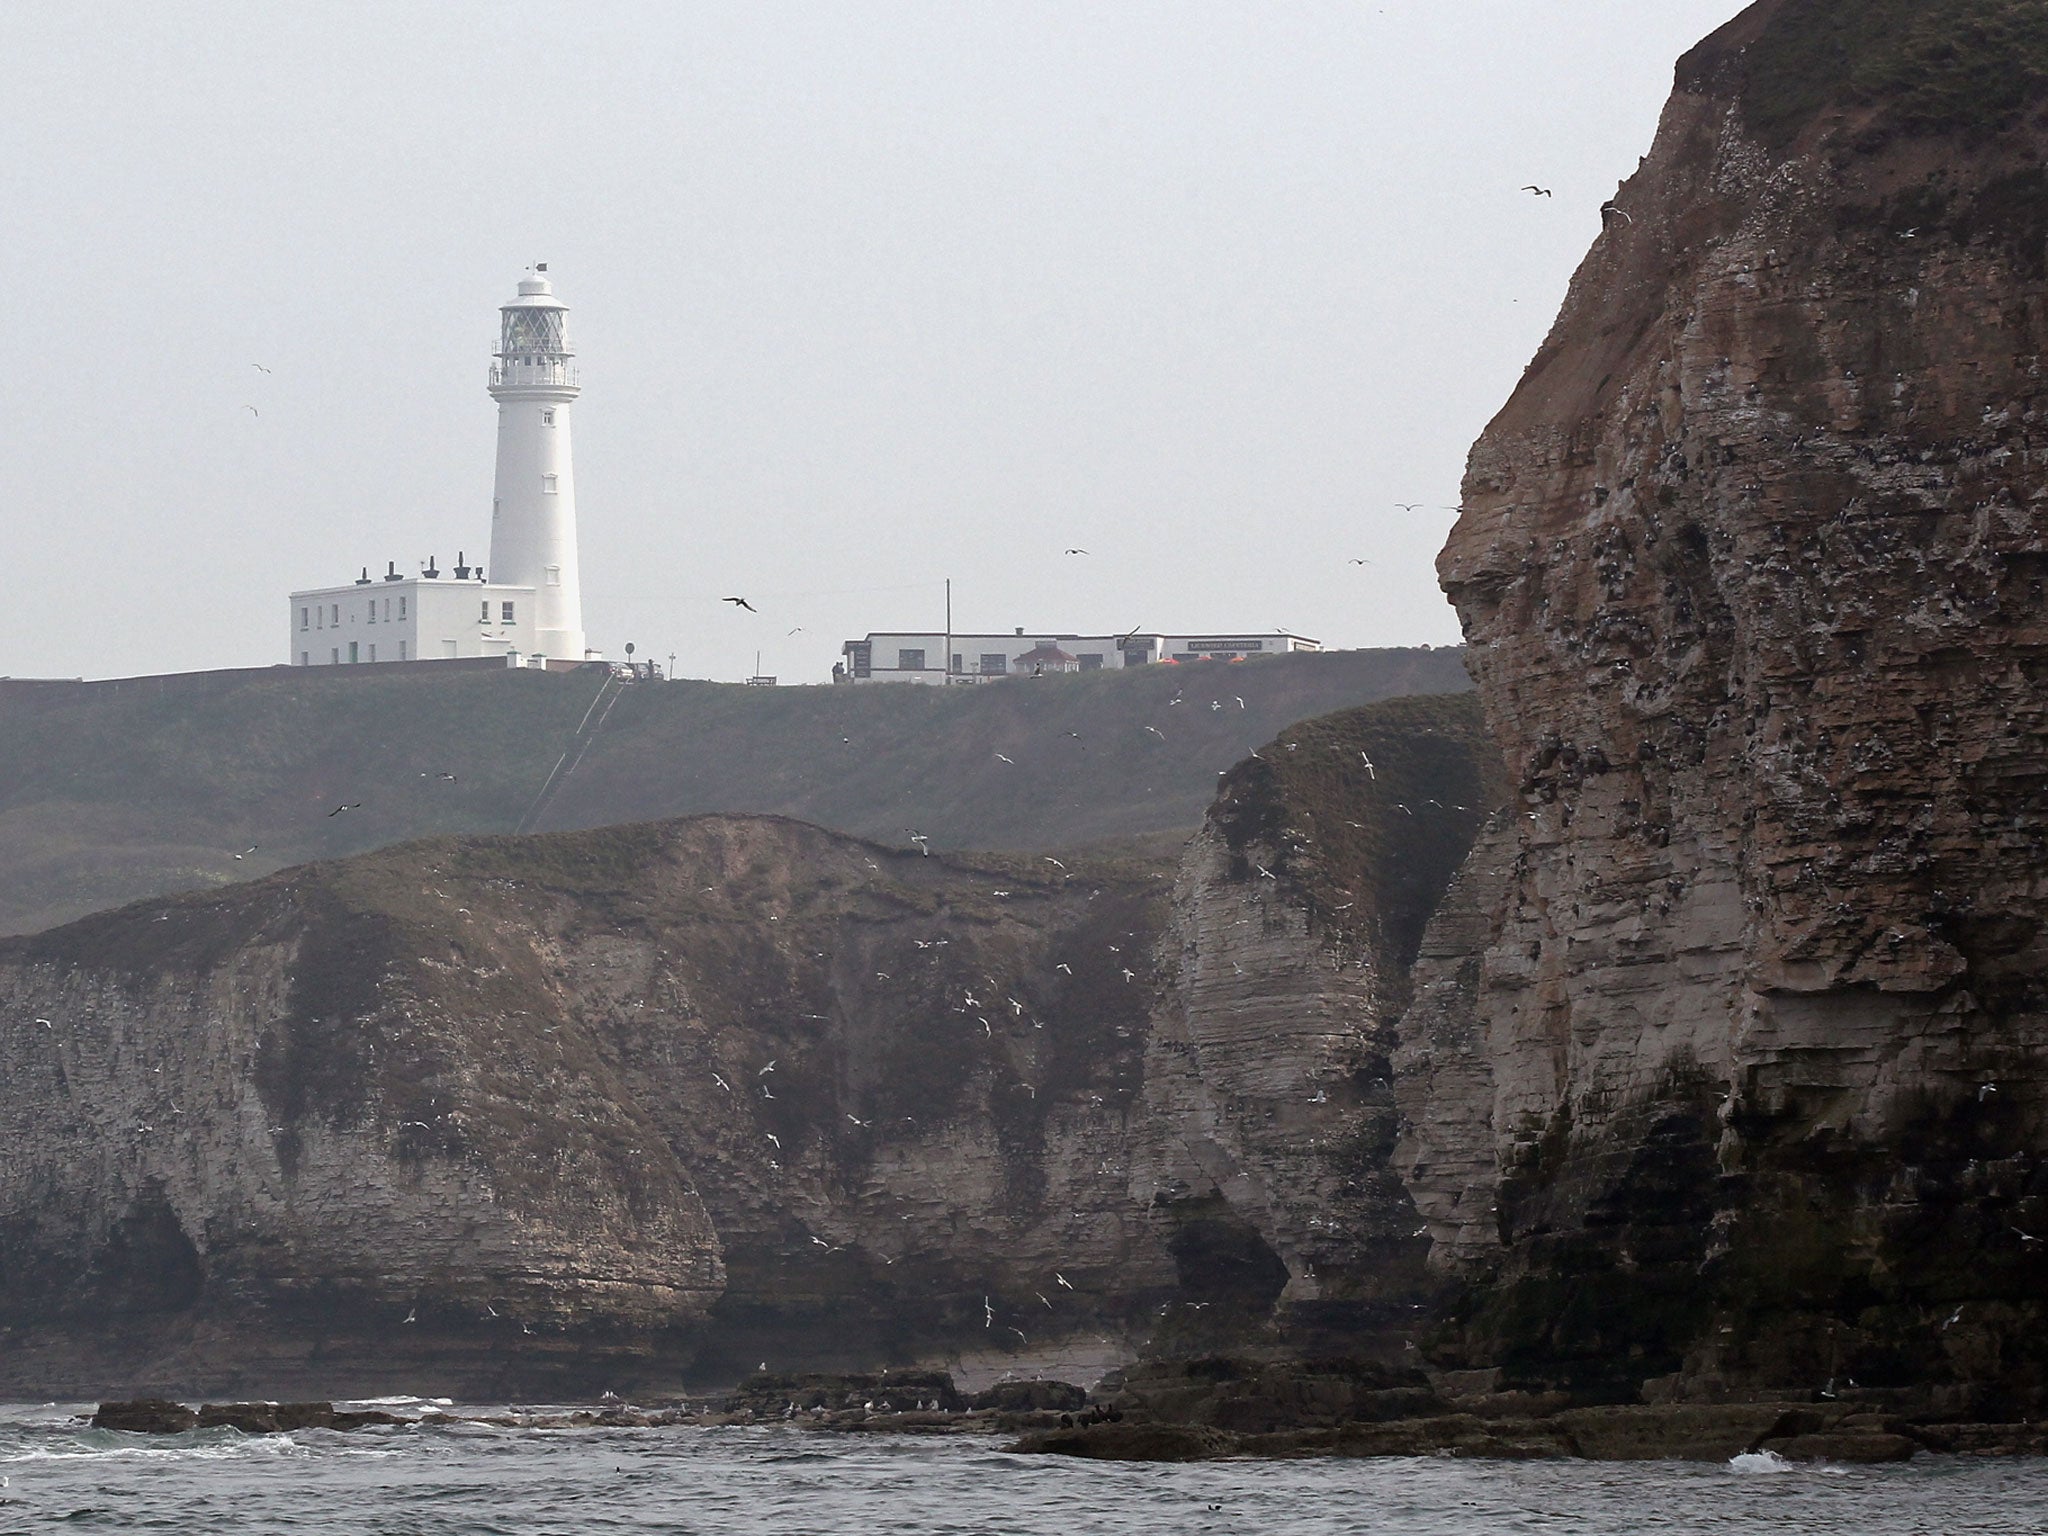 Cliffs in Flamborough on the East Yorkshire coast where a helicopter crashed on Tuesday